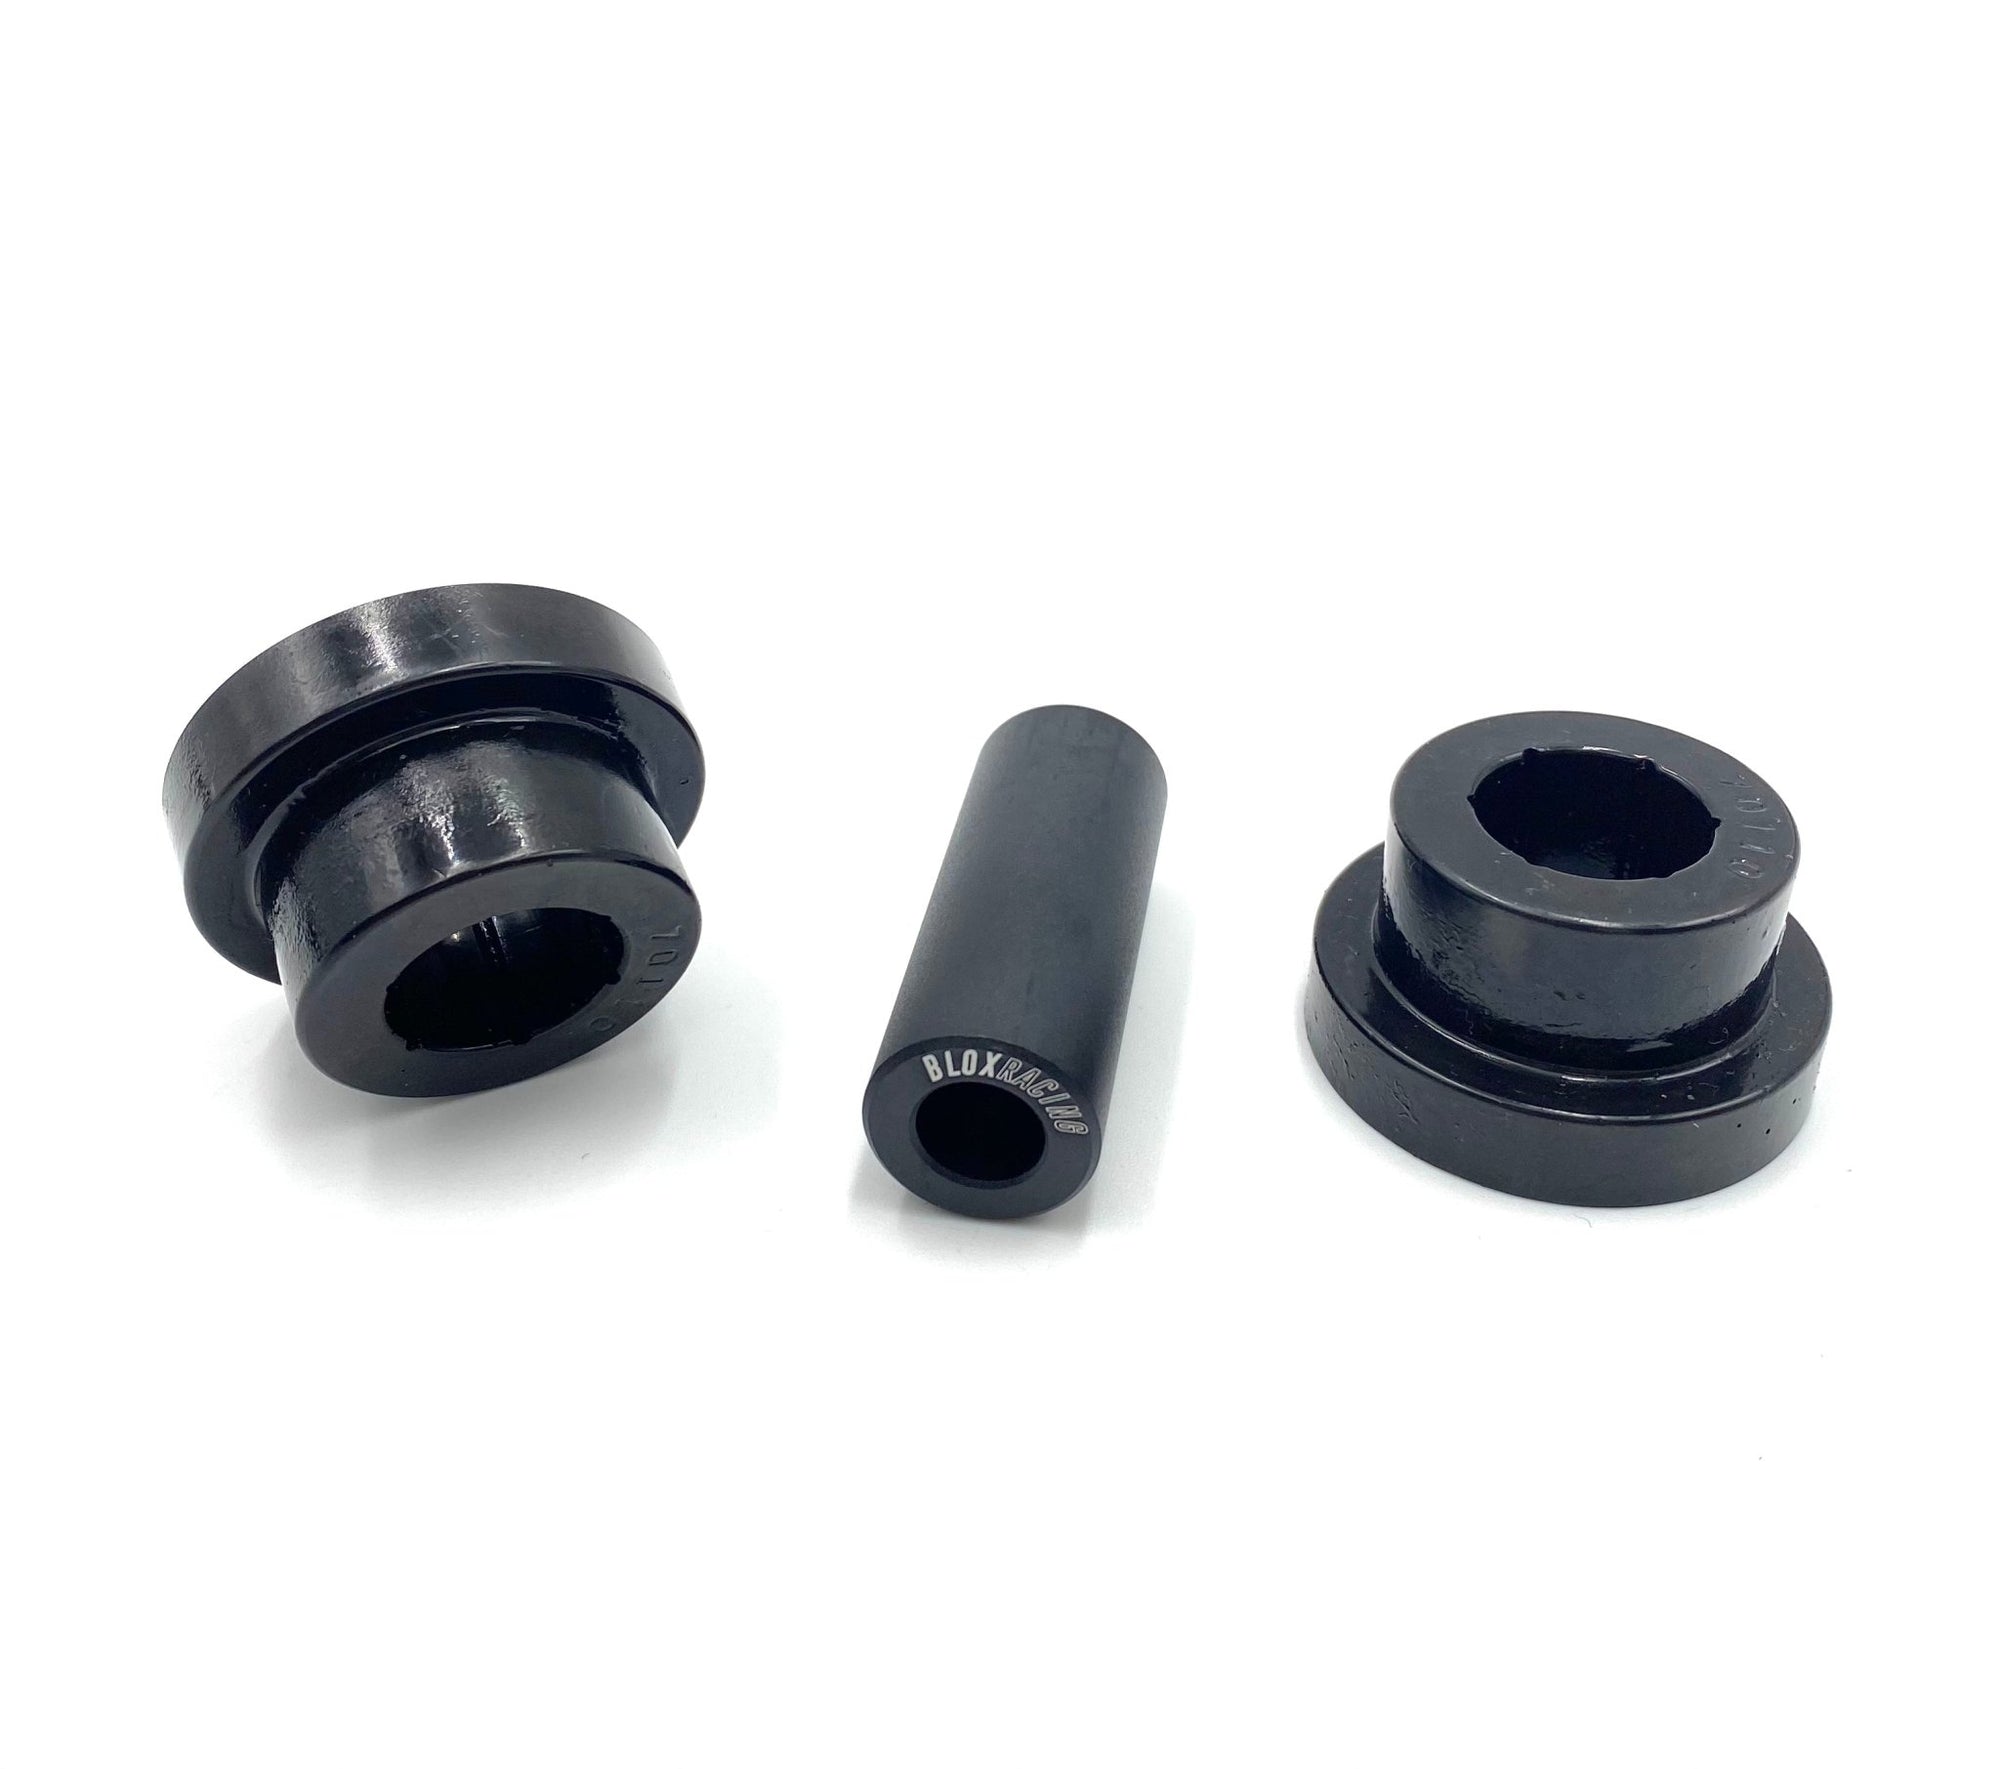 Replacement Prothane Polyurethane Bushing for Billet Rear Lower Control Arms - 88-95 Civic / 90-01 Integra - BLOX Racing